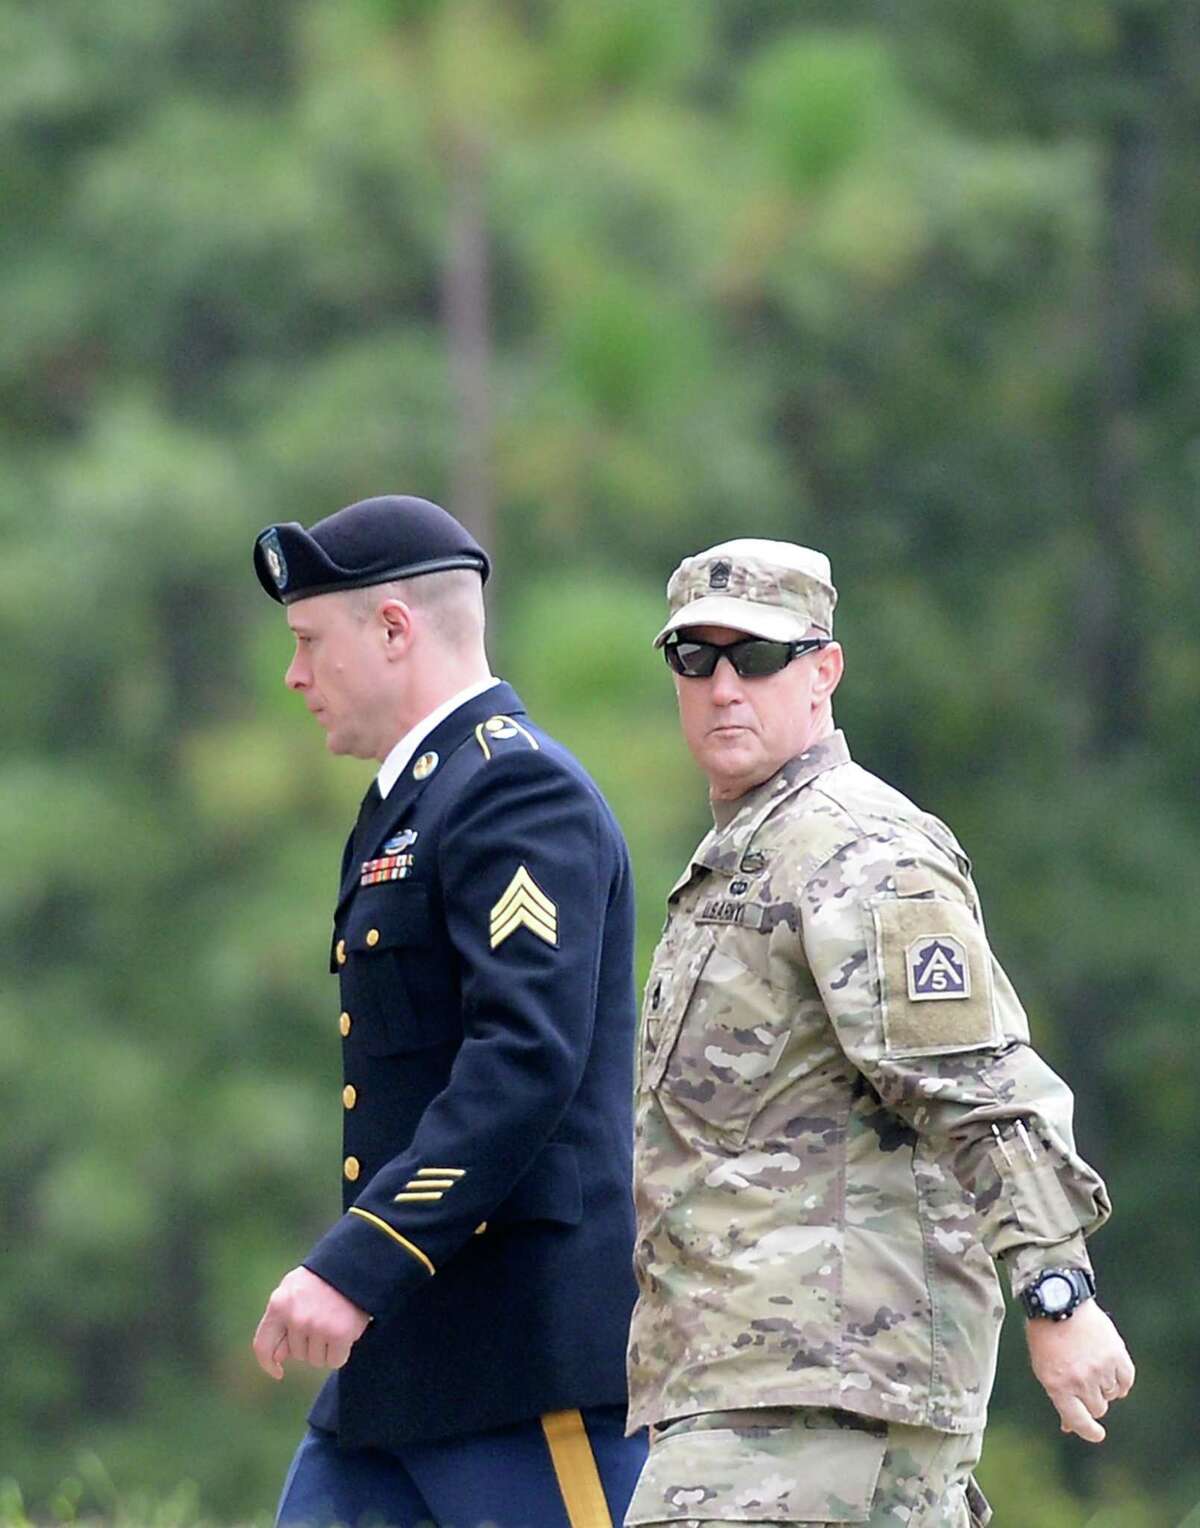 FORT BRAGG, NC - OCTOBER 16: U.S. Army Sgt. Robert Bowdrie (L), 29 of Hailey, Idaho, is escorted into the Ft. Bragg military courthouse for a motions hearing on October 16, 2017 in Fort Bragg, North Carolina. Bergdahl faces charges of desertion and endangering troops stemming from his decision to leave his outpost in 2009, which landed him five years in Taliban captivity. (Photo by Sara D. Davis/Getty Images)